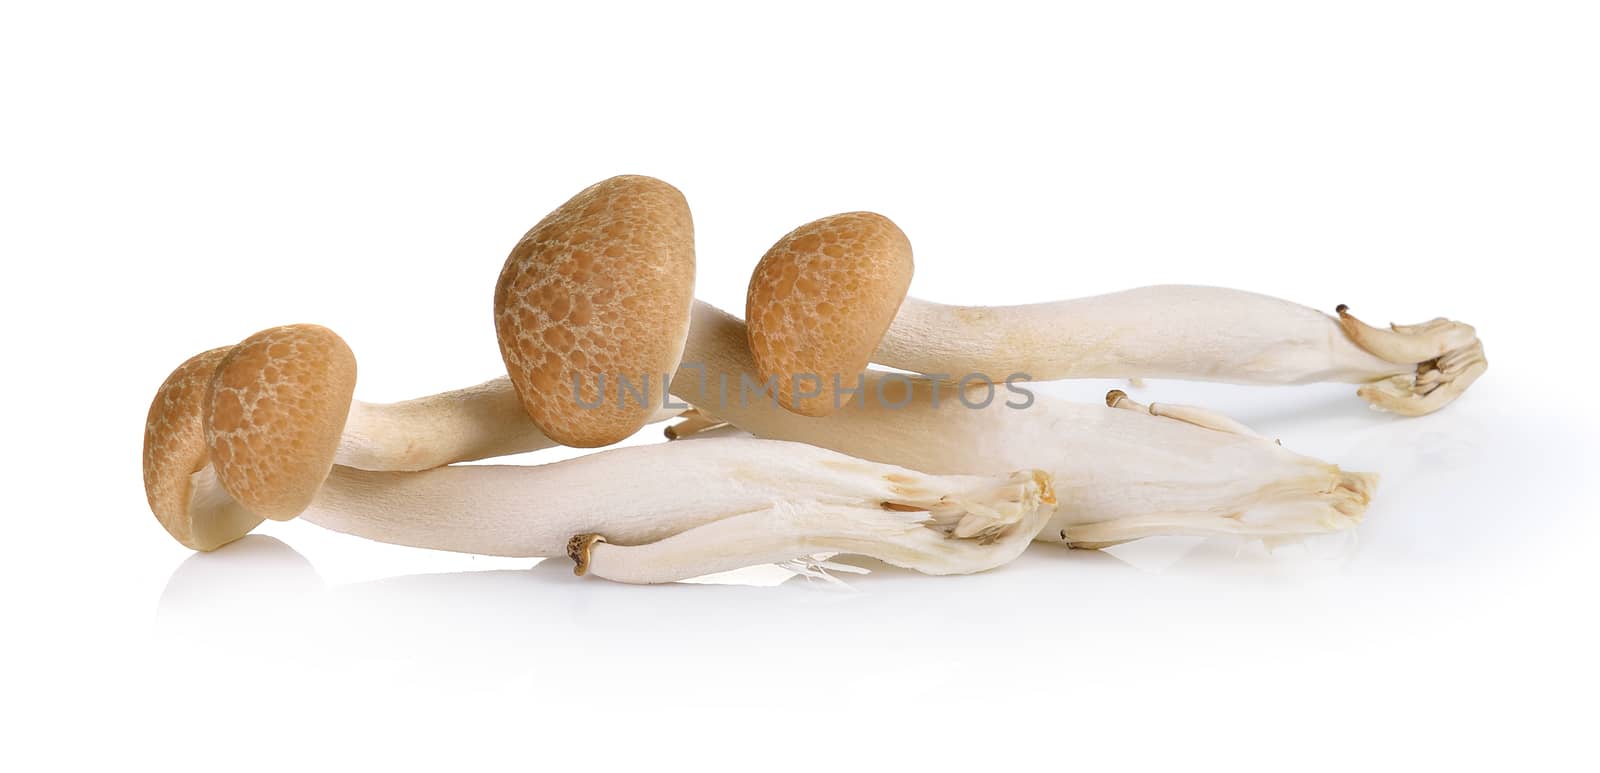 Brown beech mushrooms isolated on white background by sommai